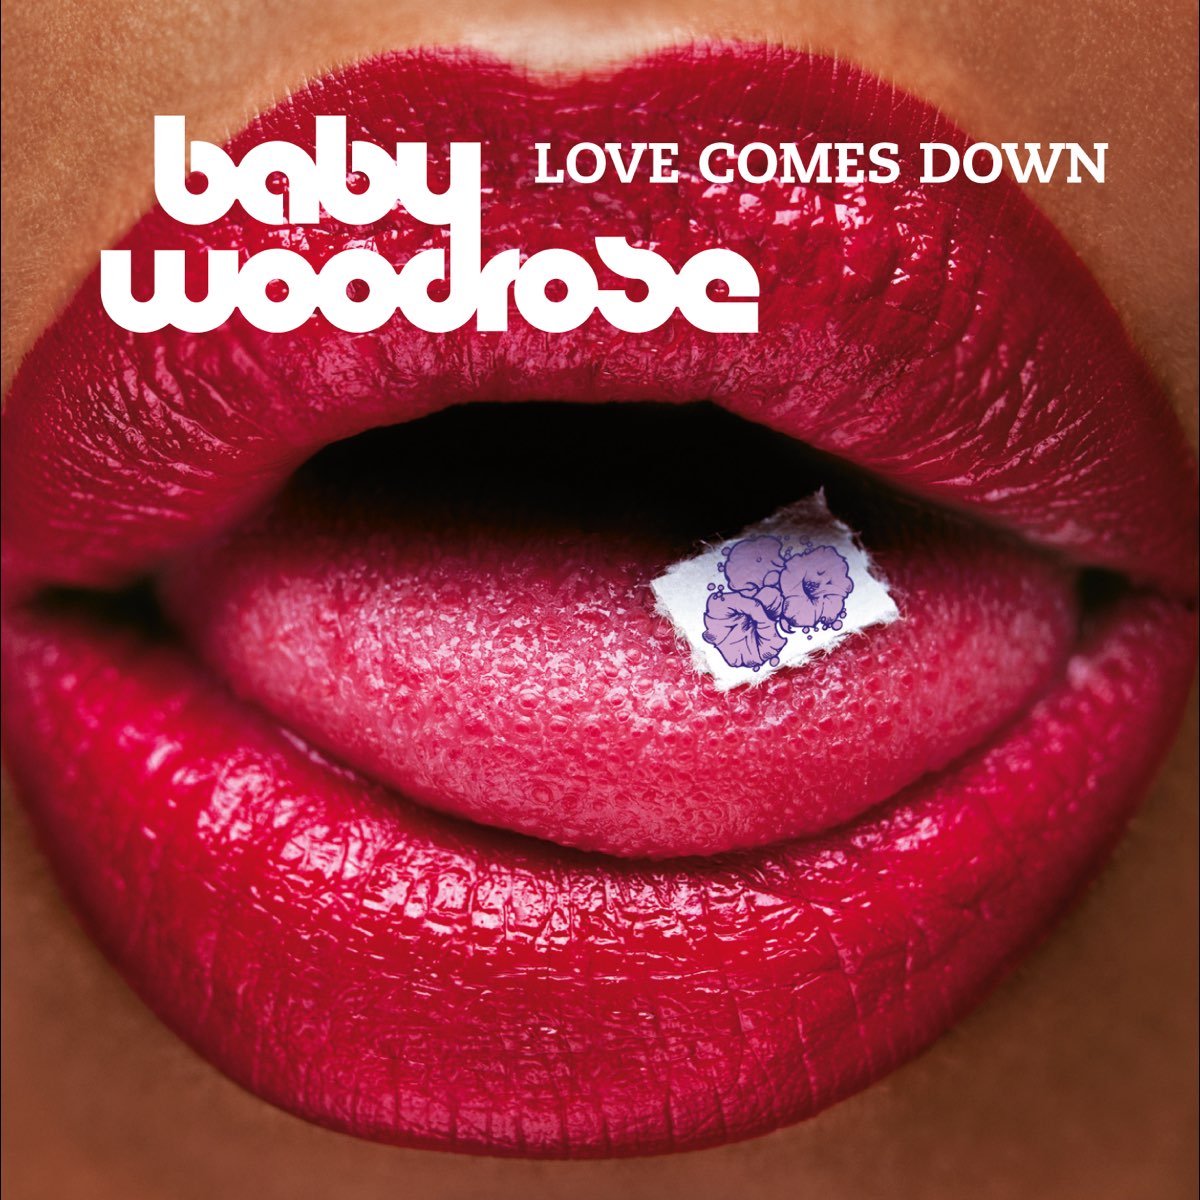 Comes love текст. Baby Woodrose. Baby Woodrose album. Baby come down. Comes Love слушать.